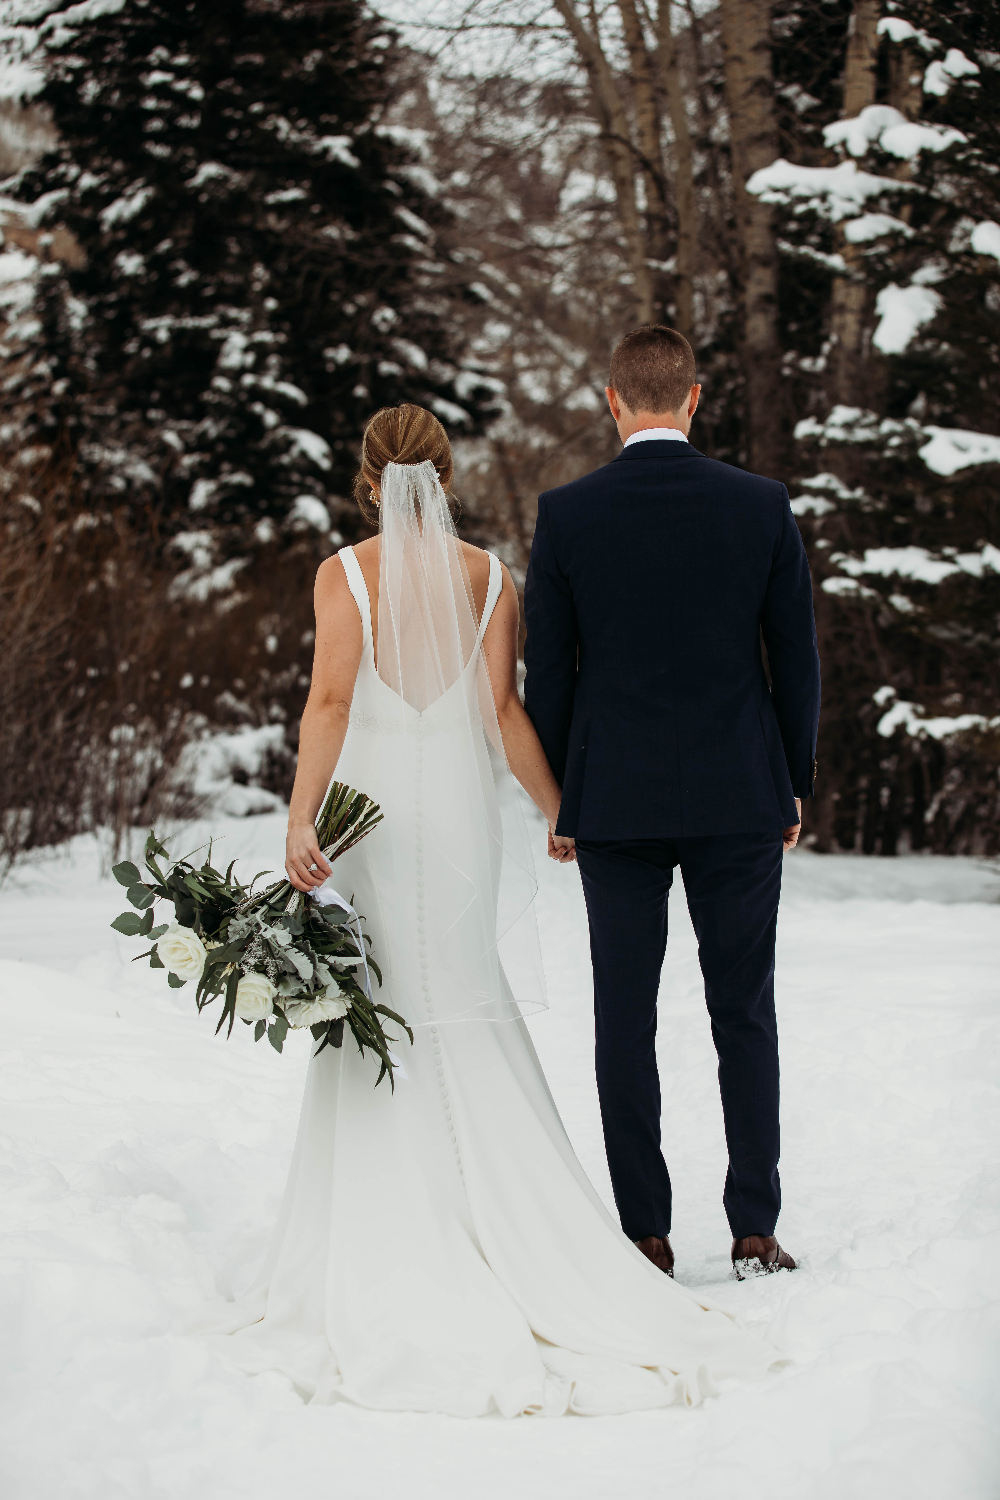 Newlyweds walking int the snow